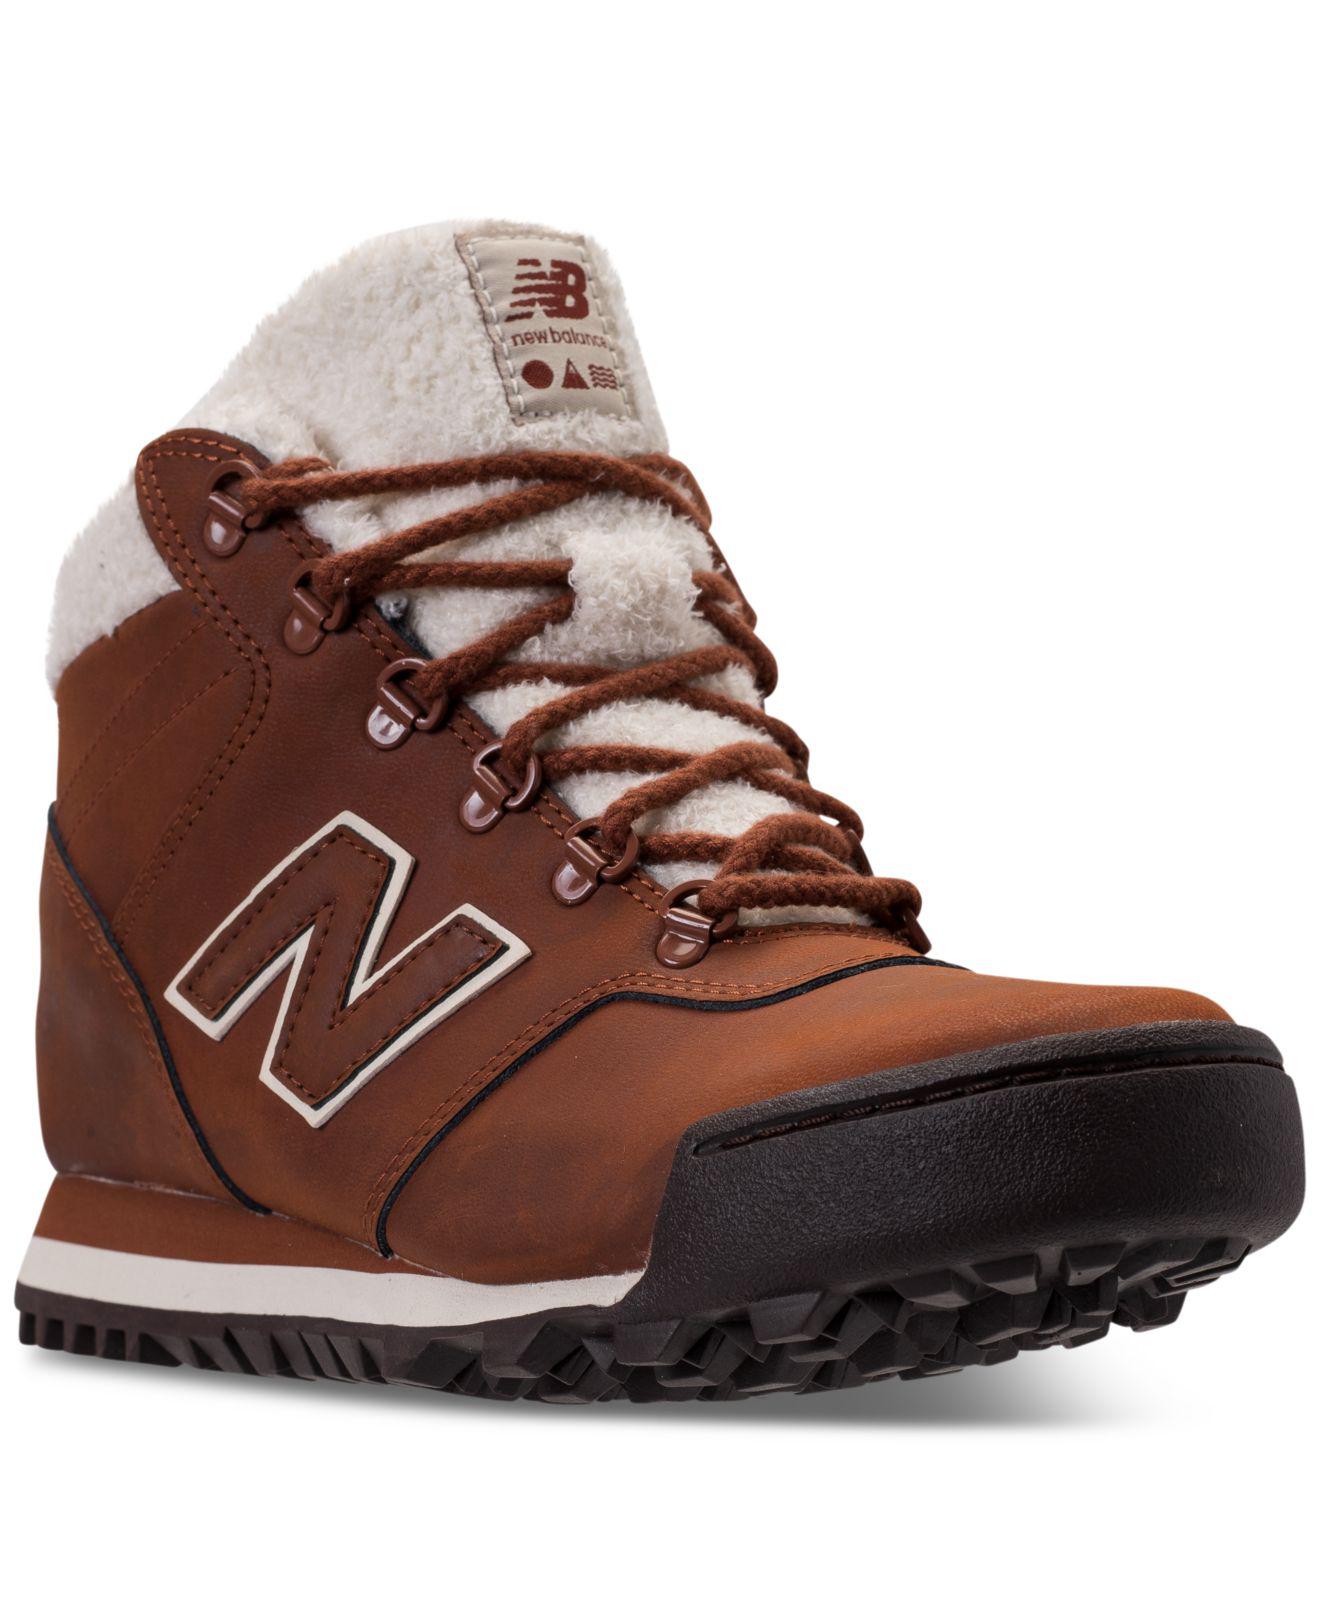 New Balance Leather Women's 701 Outdoor Sneaker Boots From Finish ...